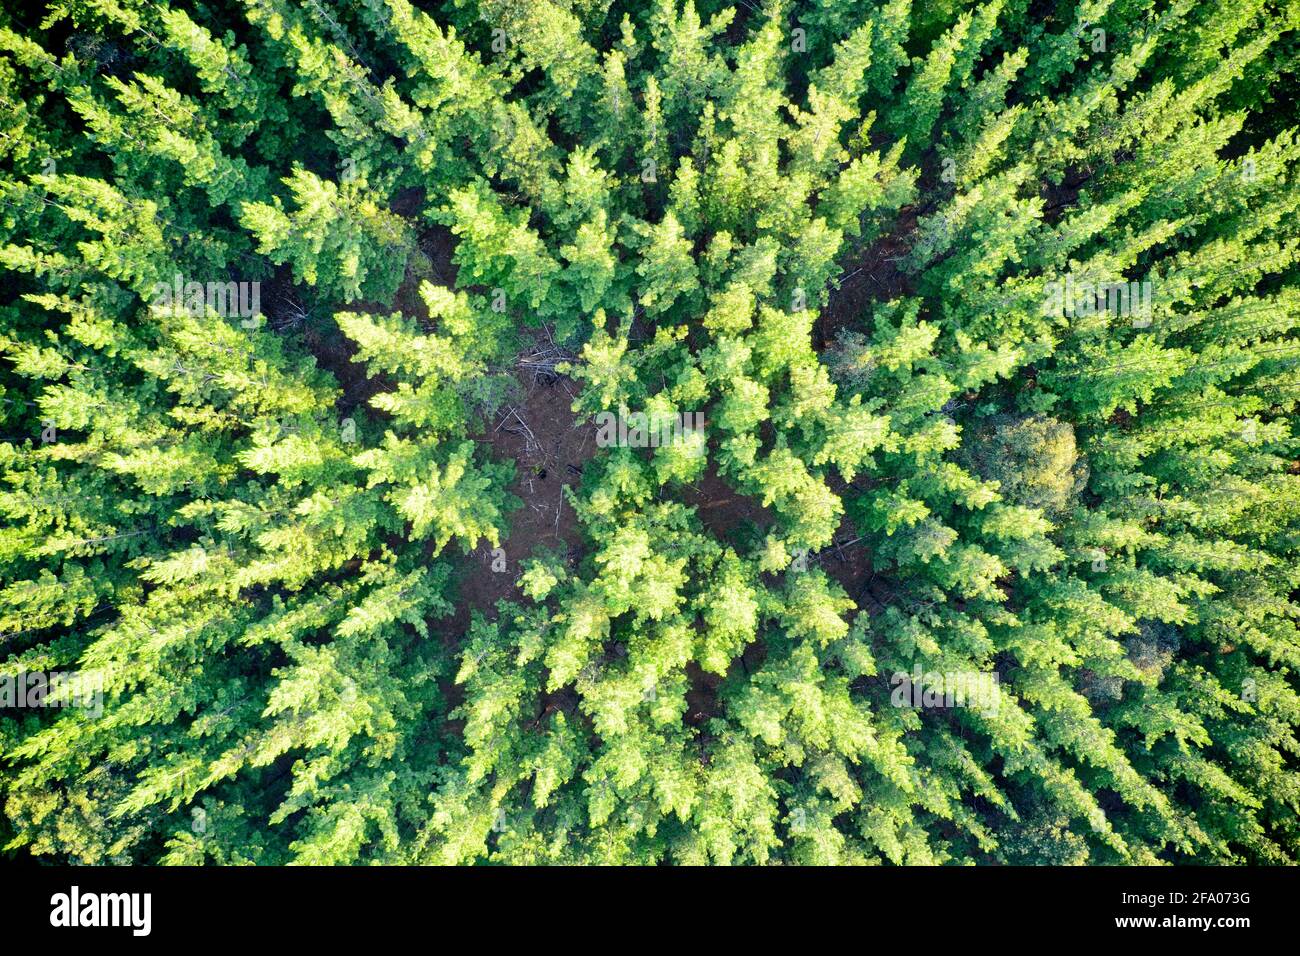 Drone view of pine forest forming patterns in nature Balingup, Western Australia. Stock Photo